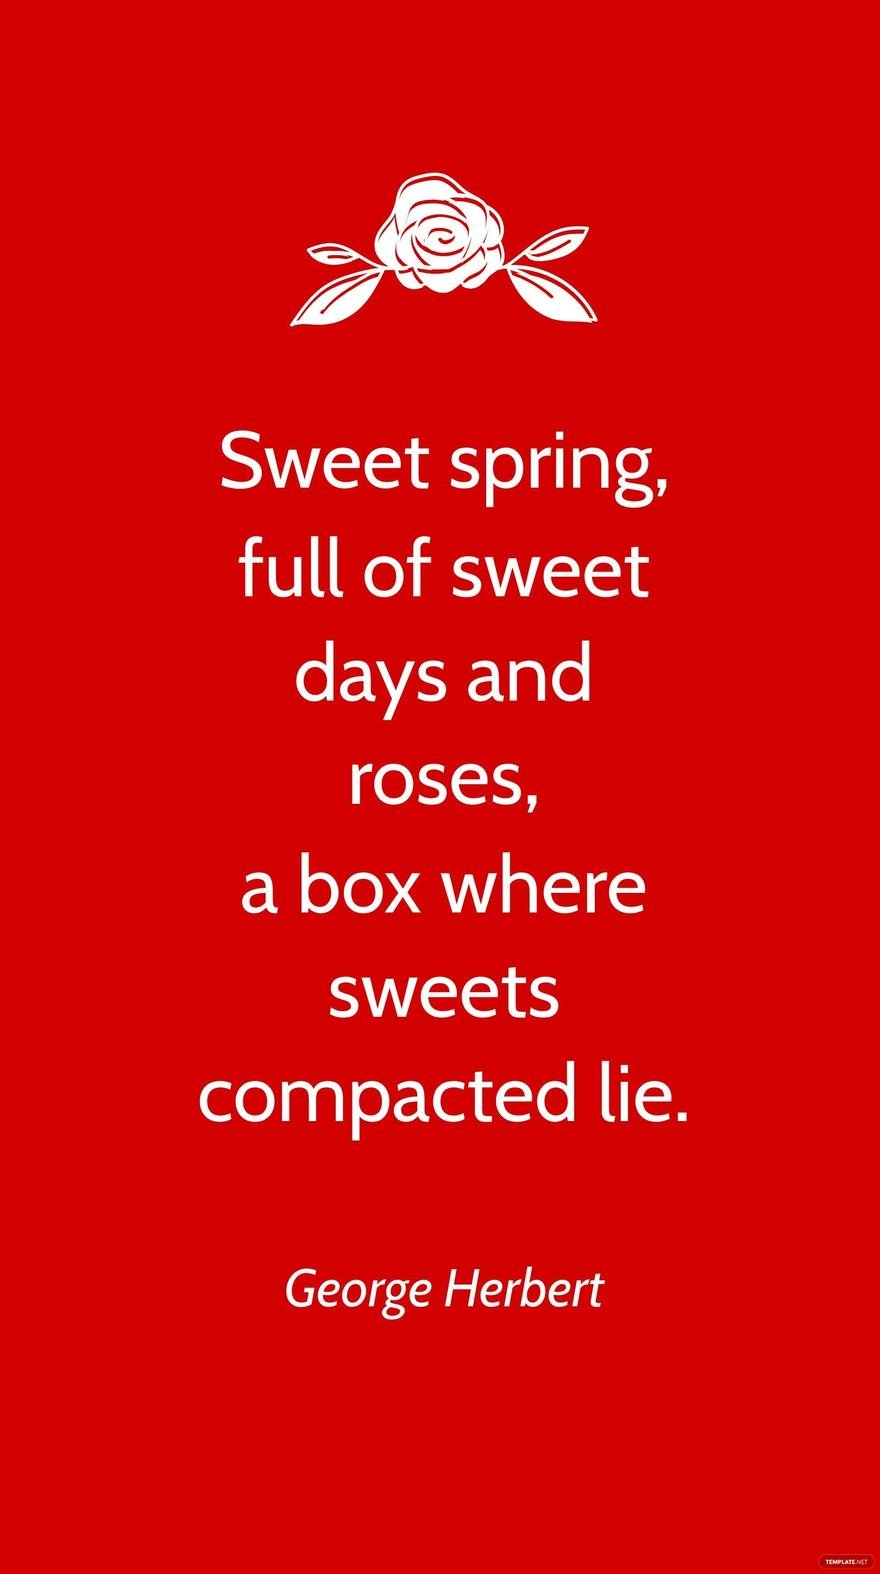 George Herbert - Sweet spring, full of sweet days and roses, a box where sweets compacted lie.